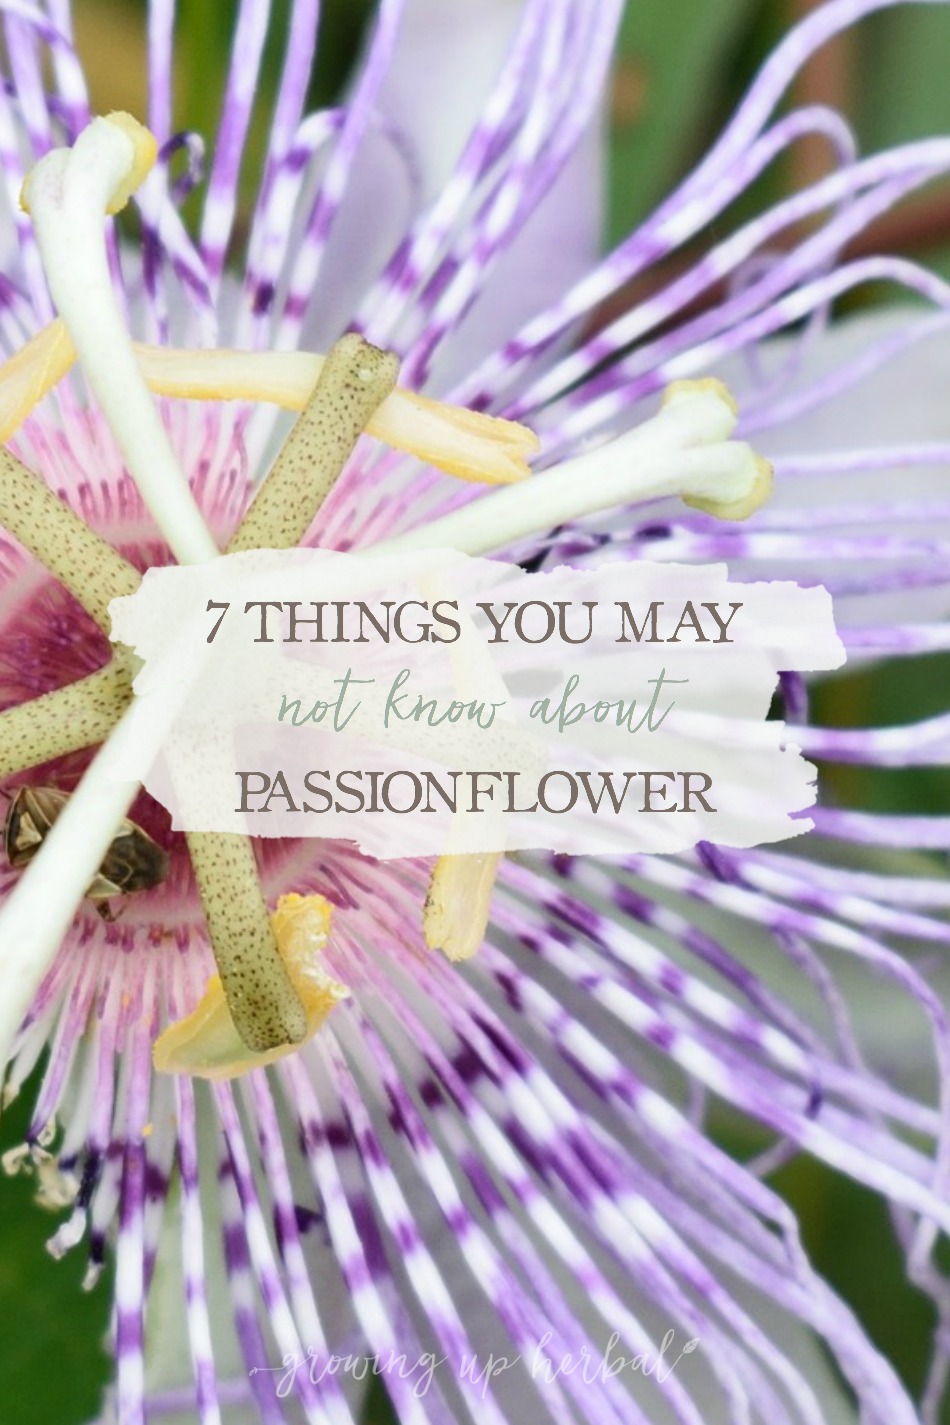 7 Things You May Not Know About Passionflower | Growing Up Herbal | Stuck in a rut with passionflower? Here are 7 little-known ways it has been used in the past. You may be surprised at how many ways this herb can be used!